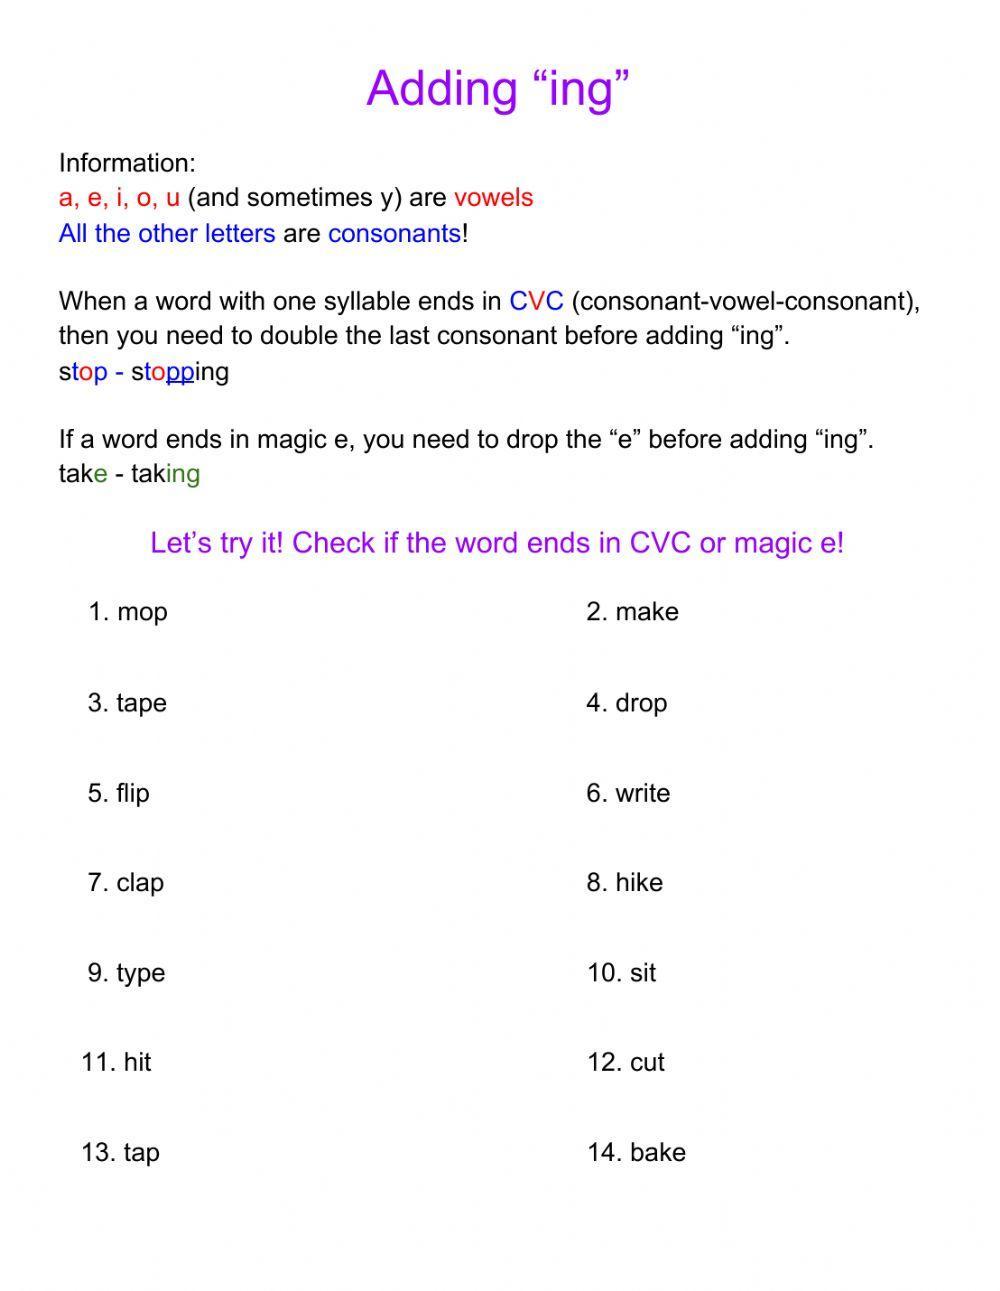 Adding -ing- to words ending in CVC or magic e